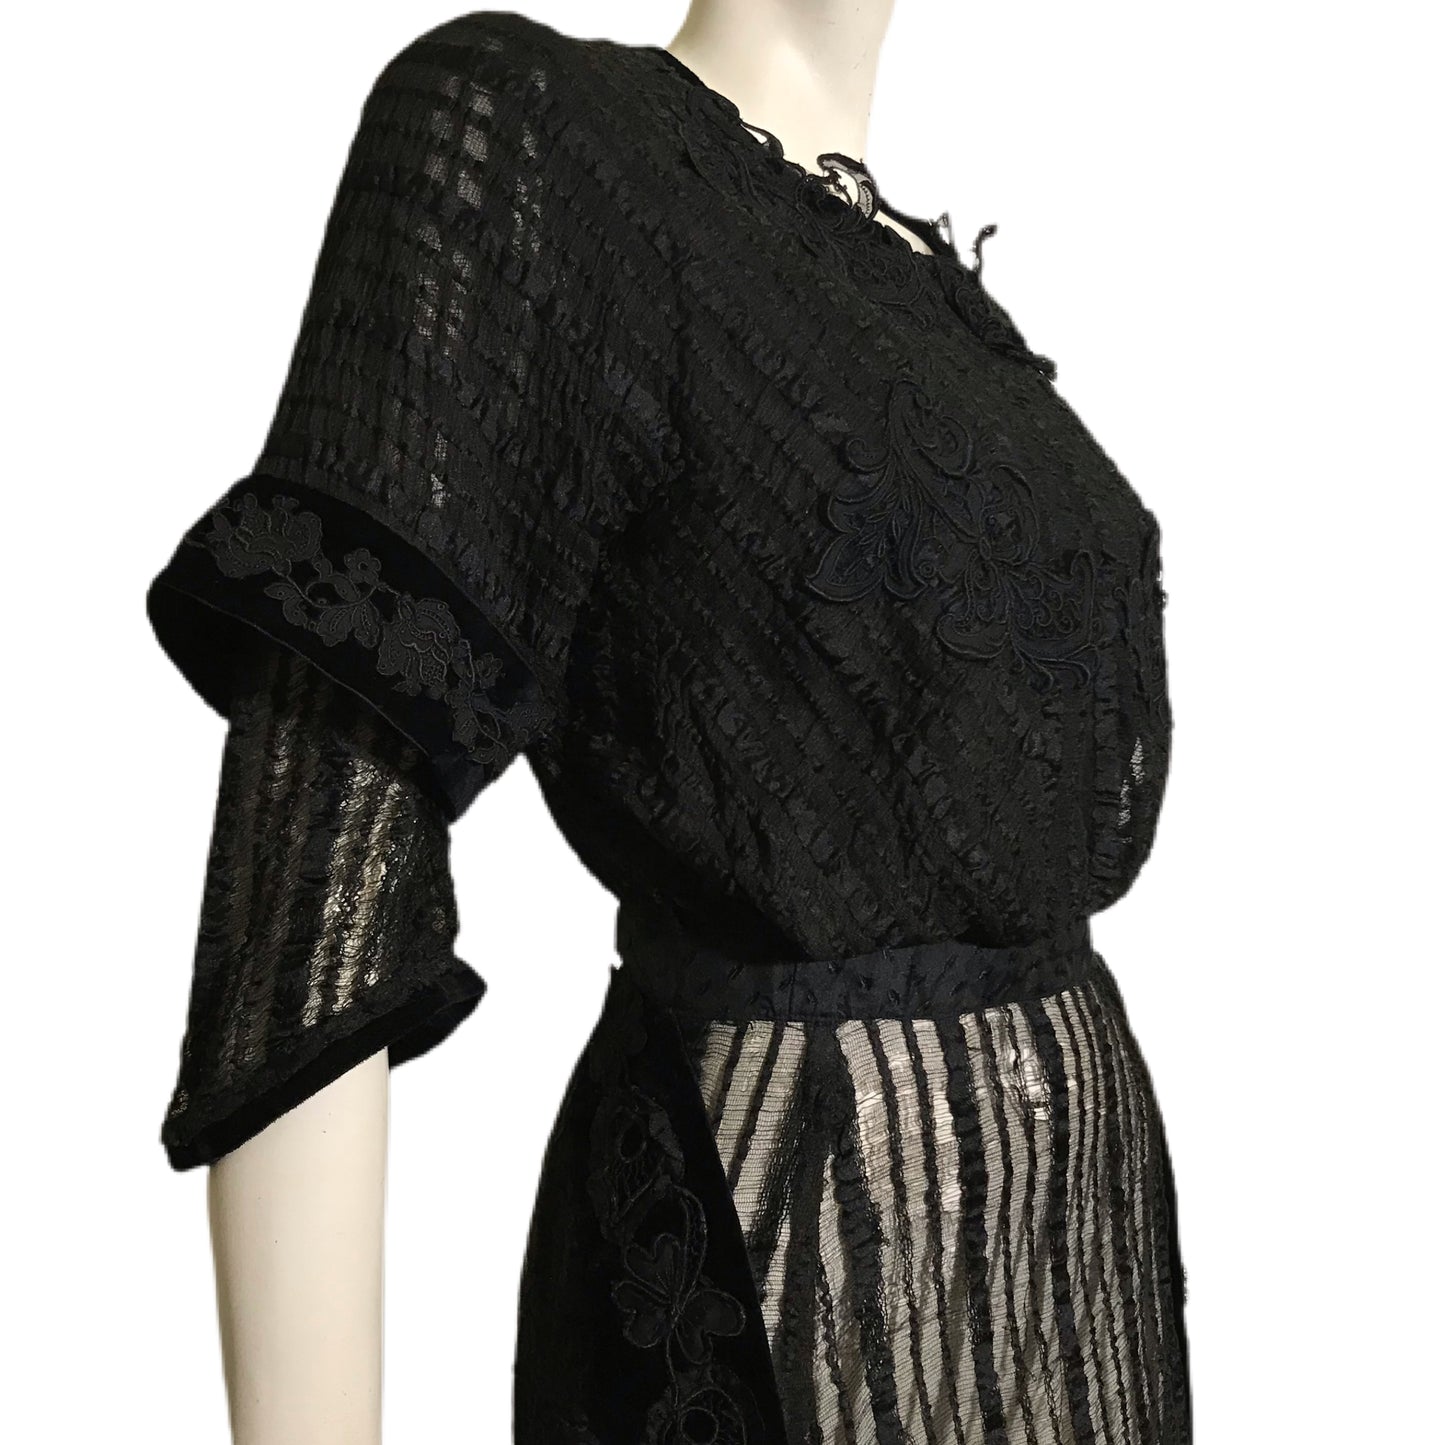 Black Web Woven Wool Long Dress with Embroidered Velvet Accents circa 1910s